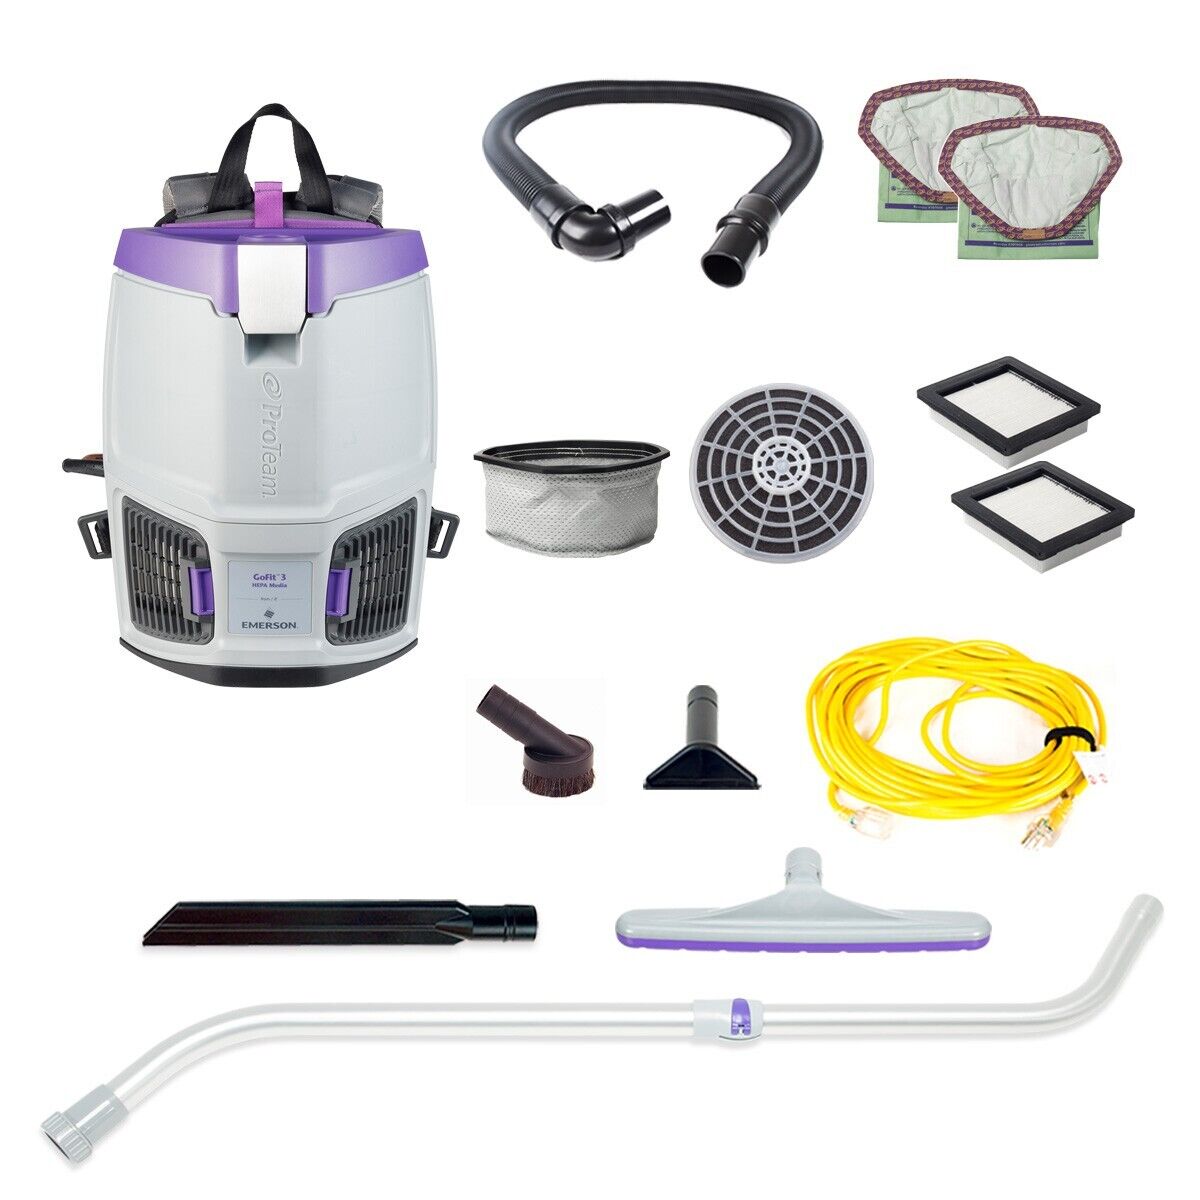 Proteam 107713 Gofit 3, 3 Qt. Backpack Vacuum W/ Xover Telescoping Wand Kit